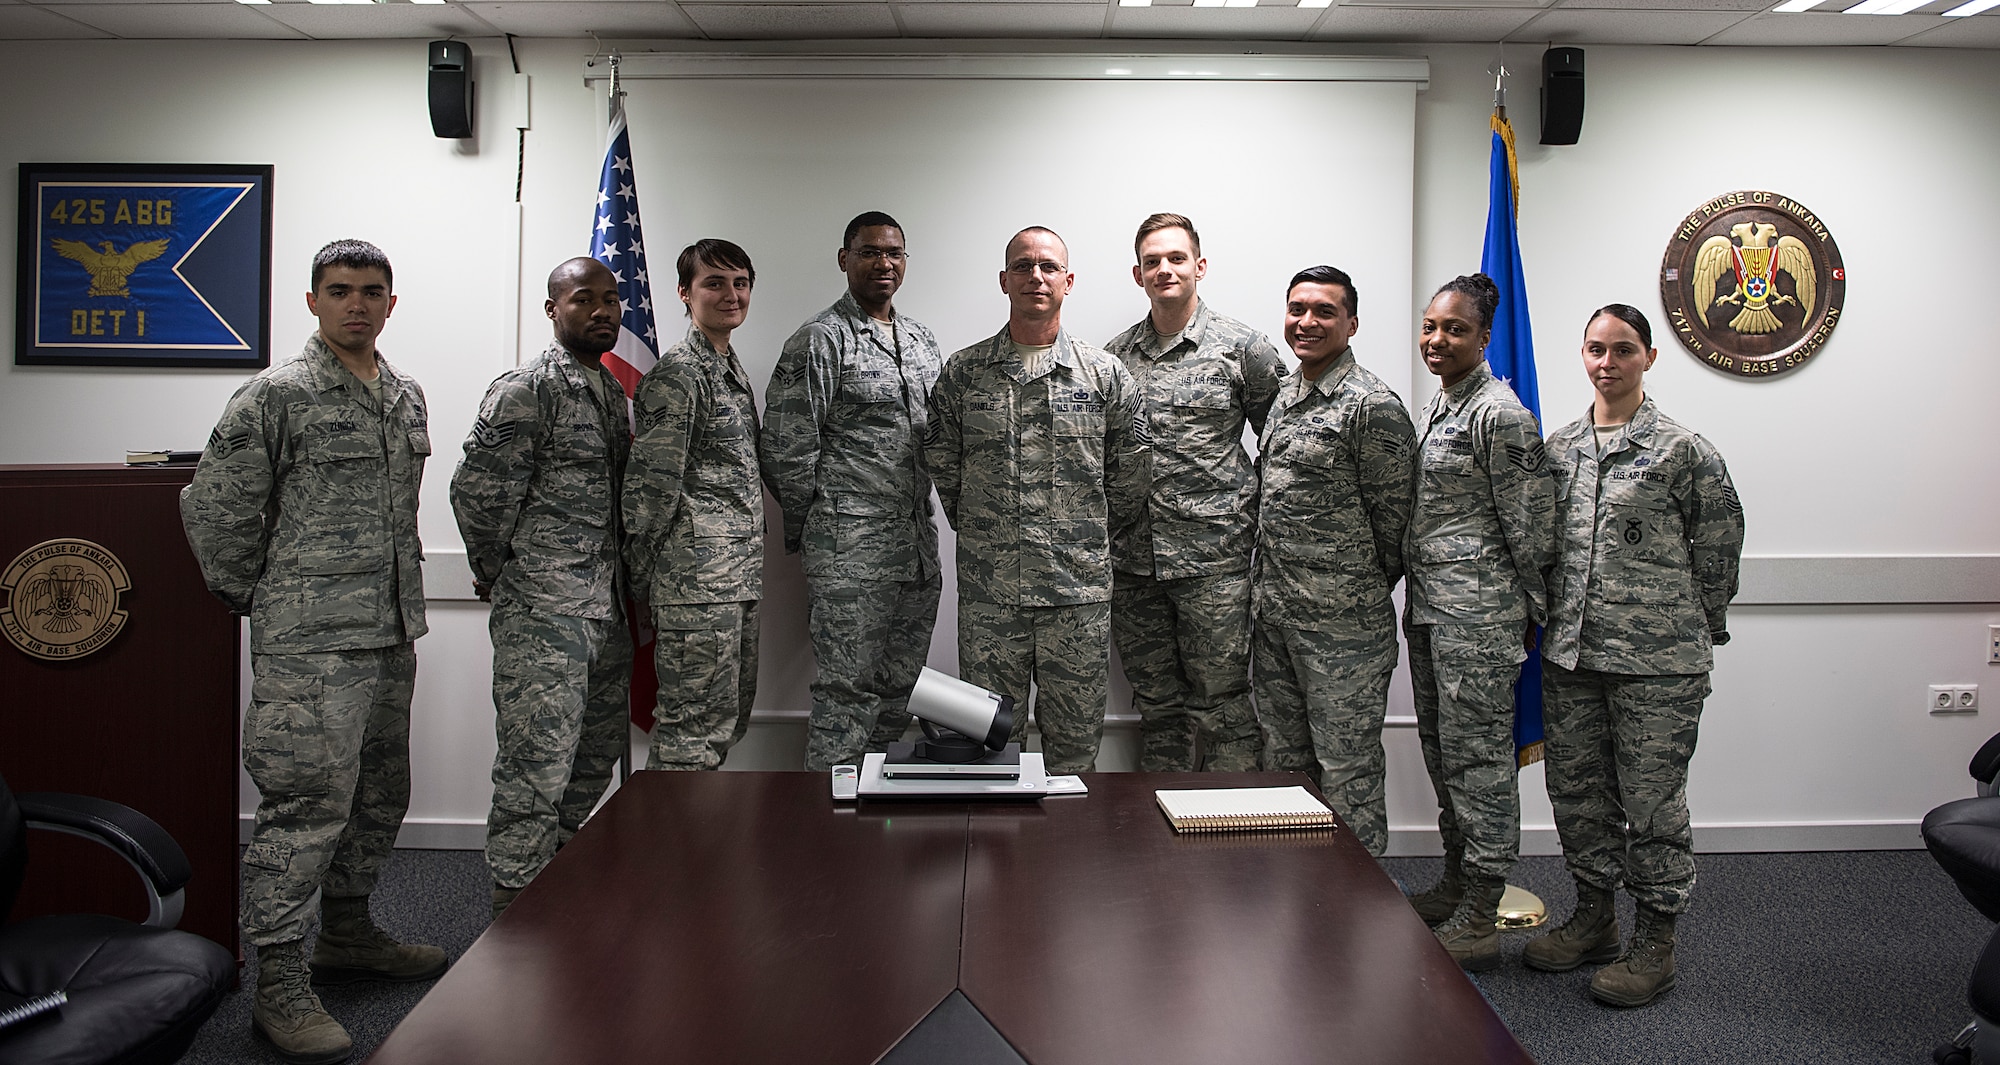 Command Chief poses for group photo with squadron